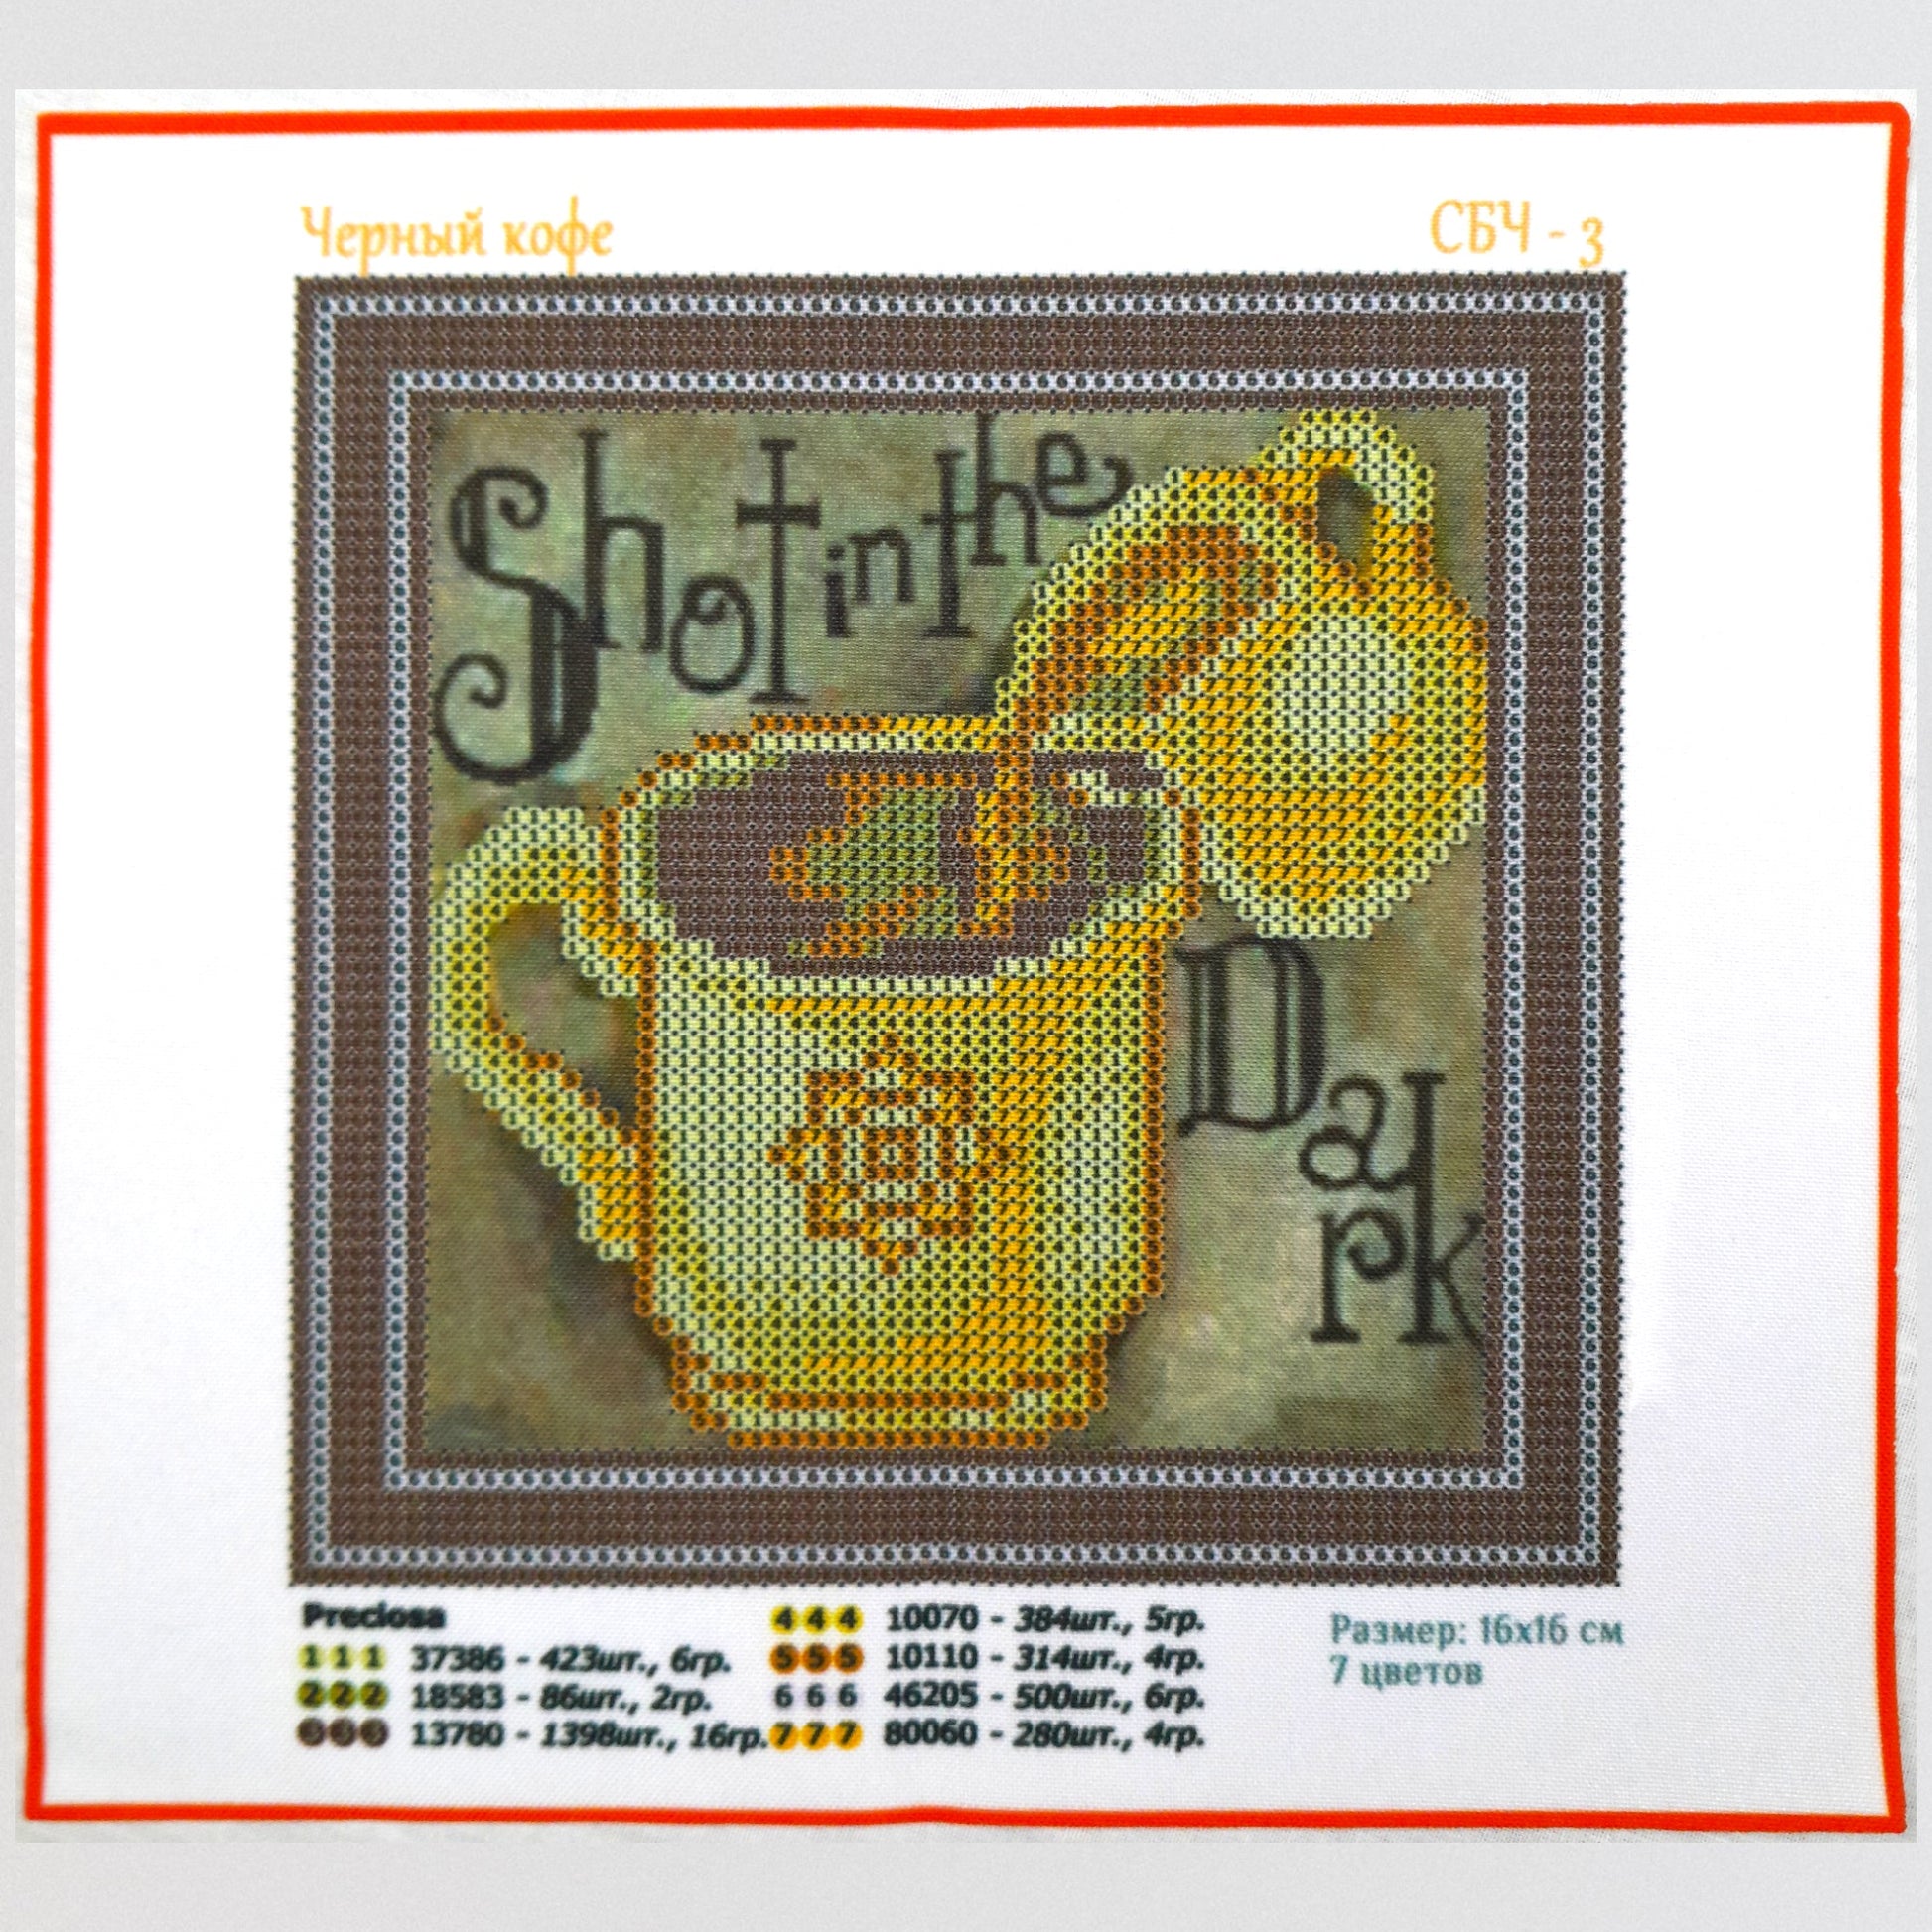 DIY Bead embroidery kit "Вlack coffee". size: 6.3 - 6.3in (16 - 16cm). - VadymShop